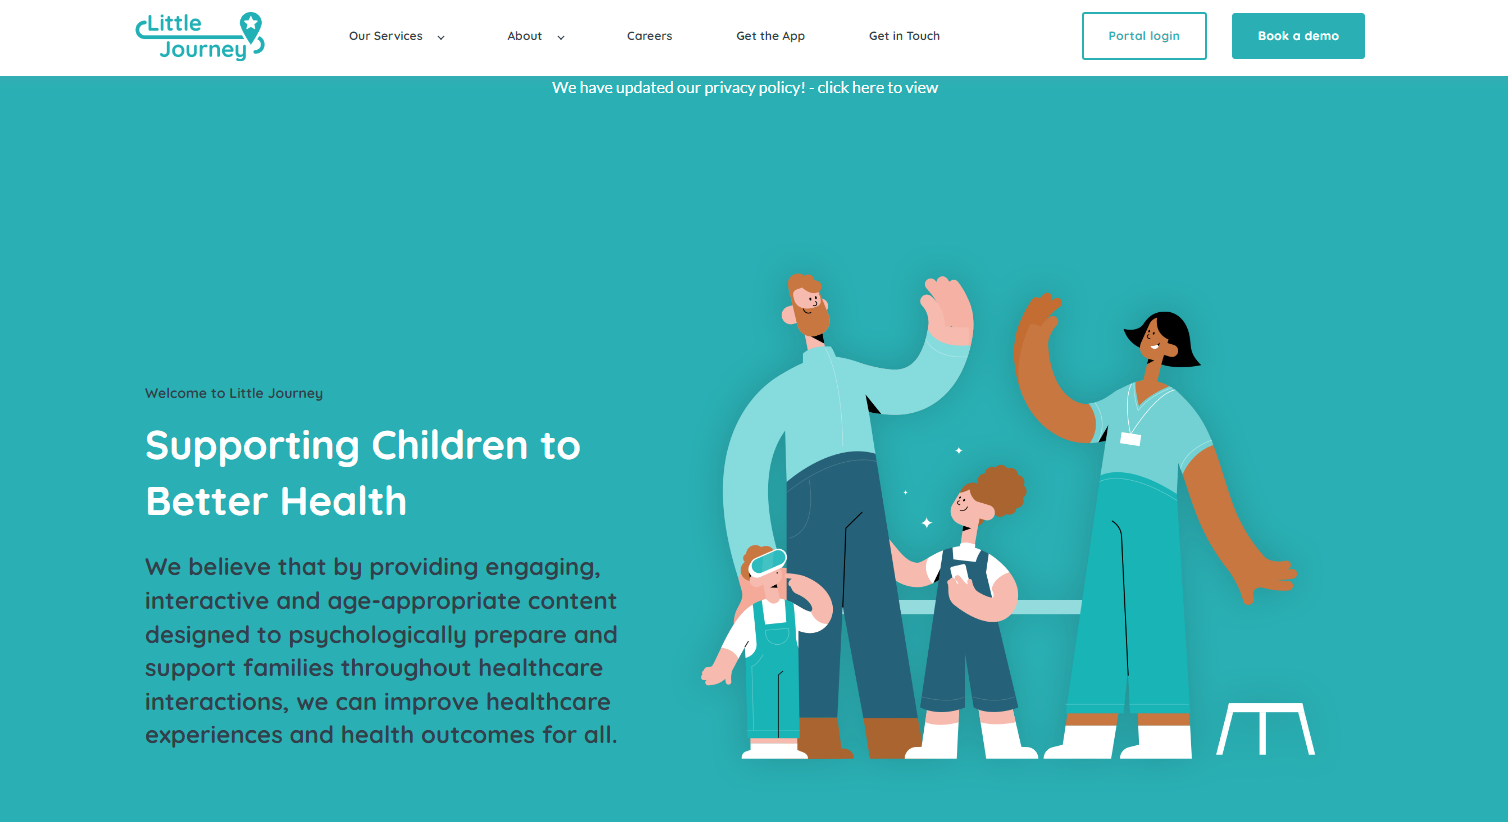 Little Journey Raises $3M in Funding to Improve Healthcare Experiences for Families.